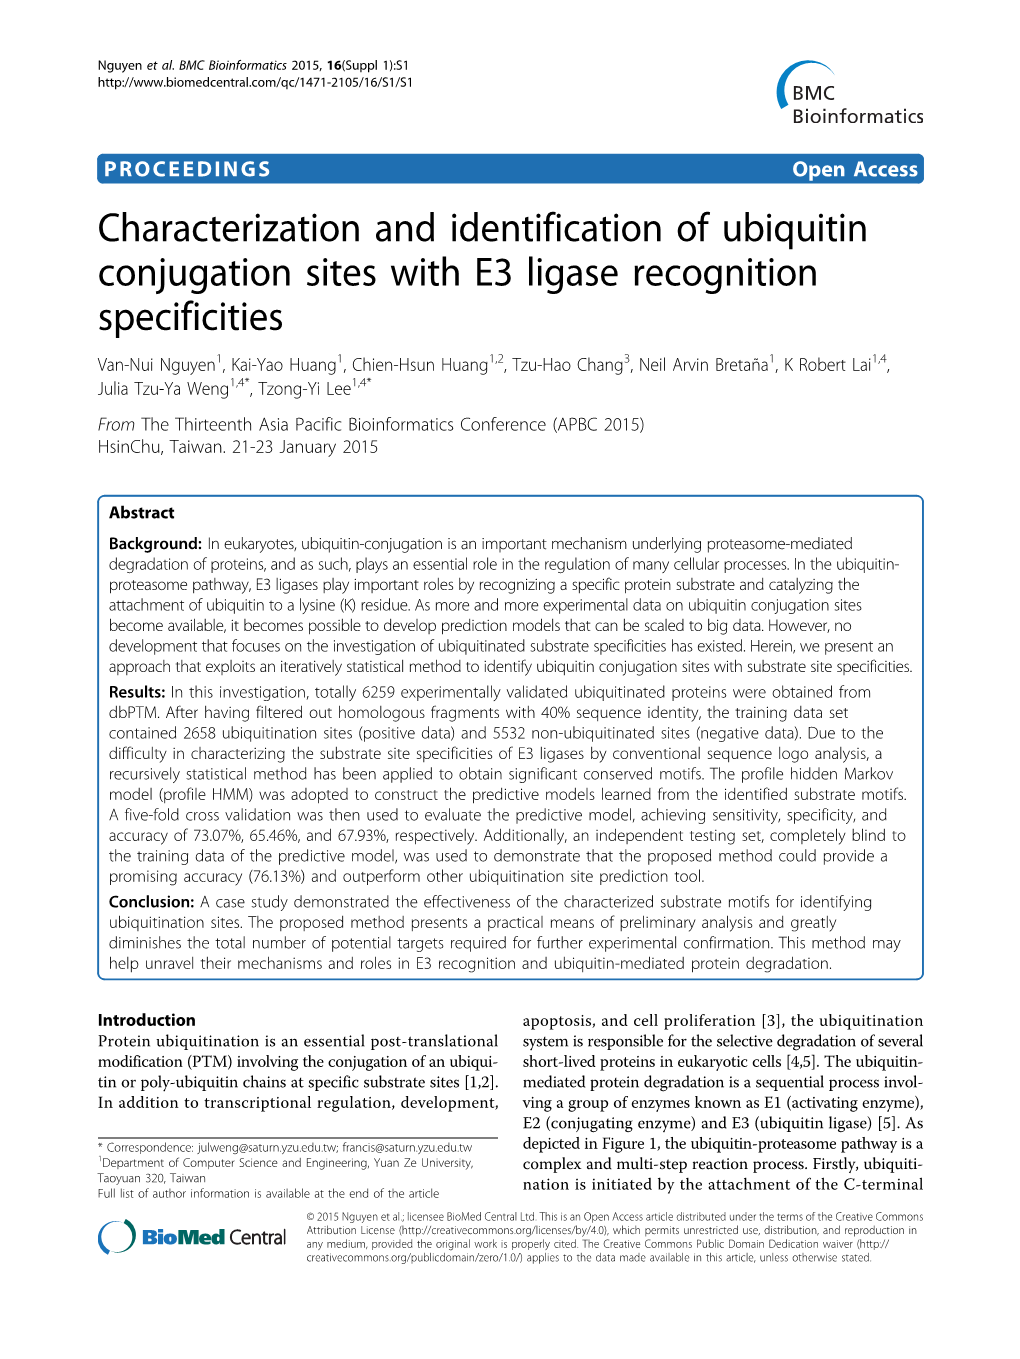 Characterization and Identification of Ubiquitin Conjugation Sites with E3